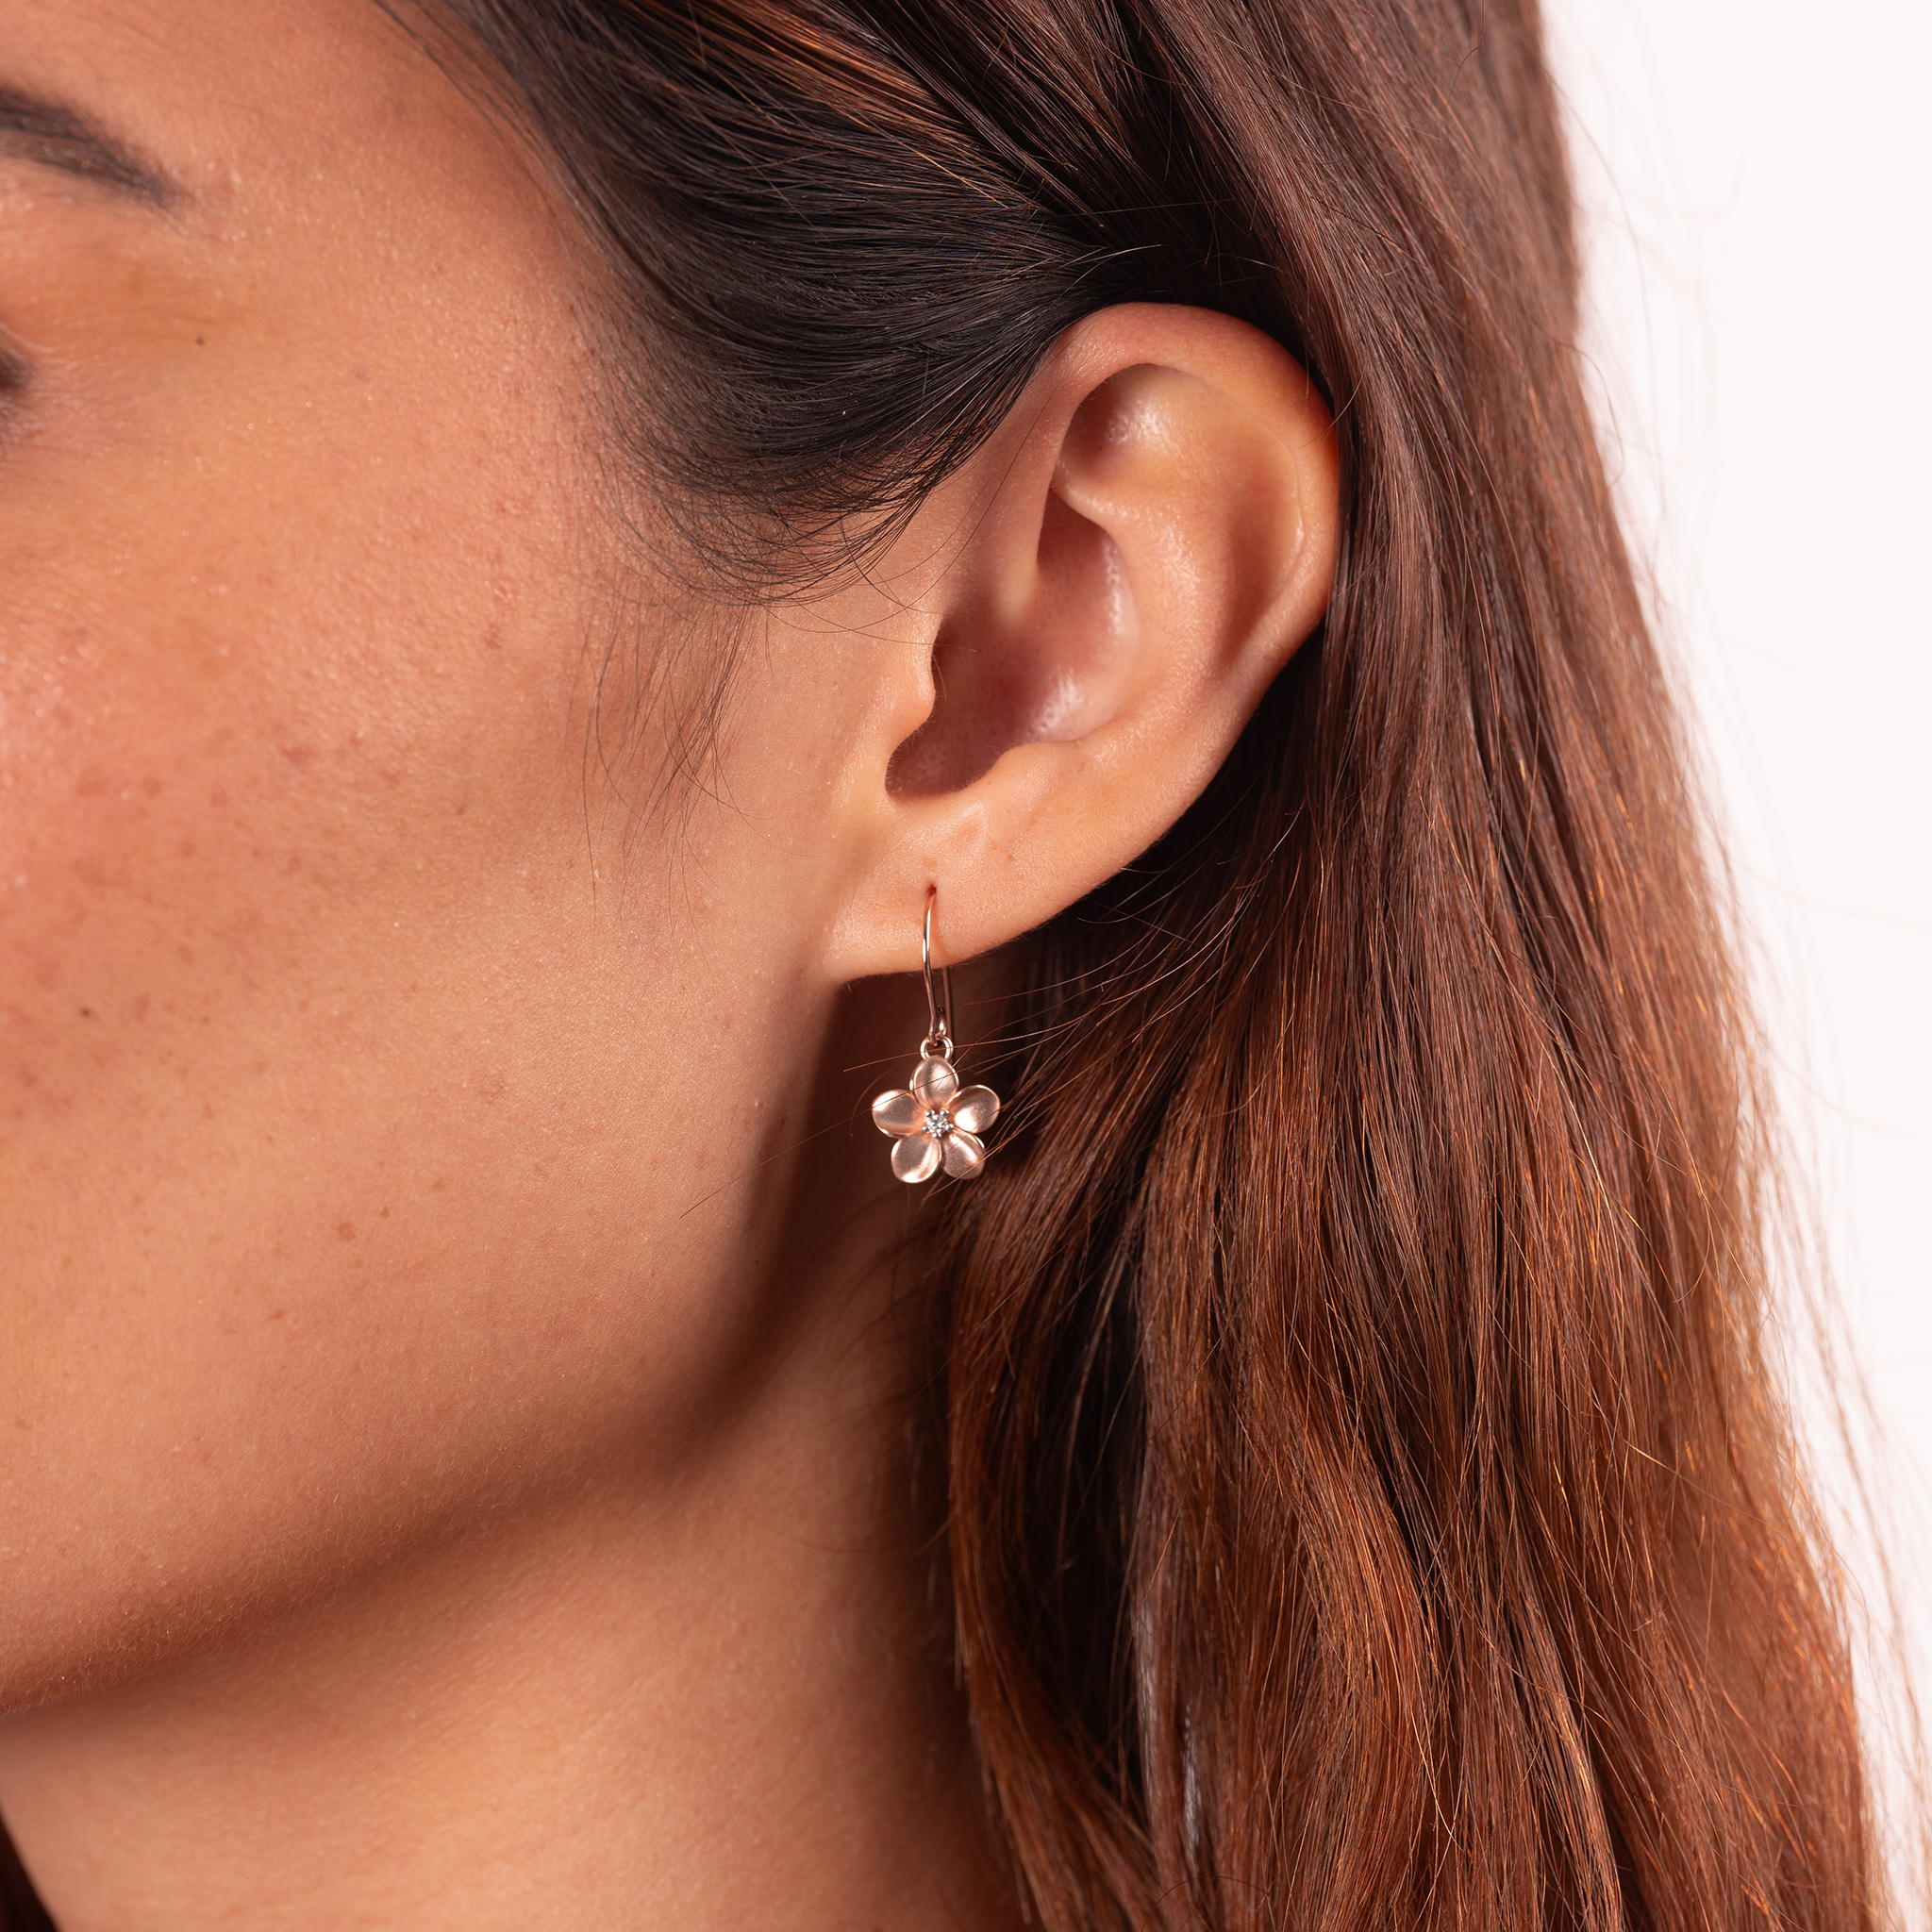 Plumeria Earrings in Rose Gold with Diamonds - 11mm